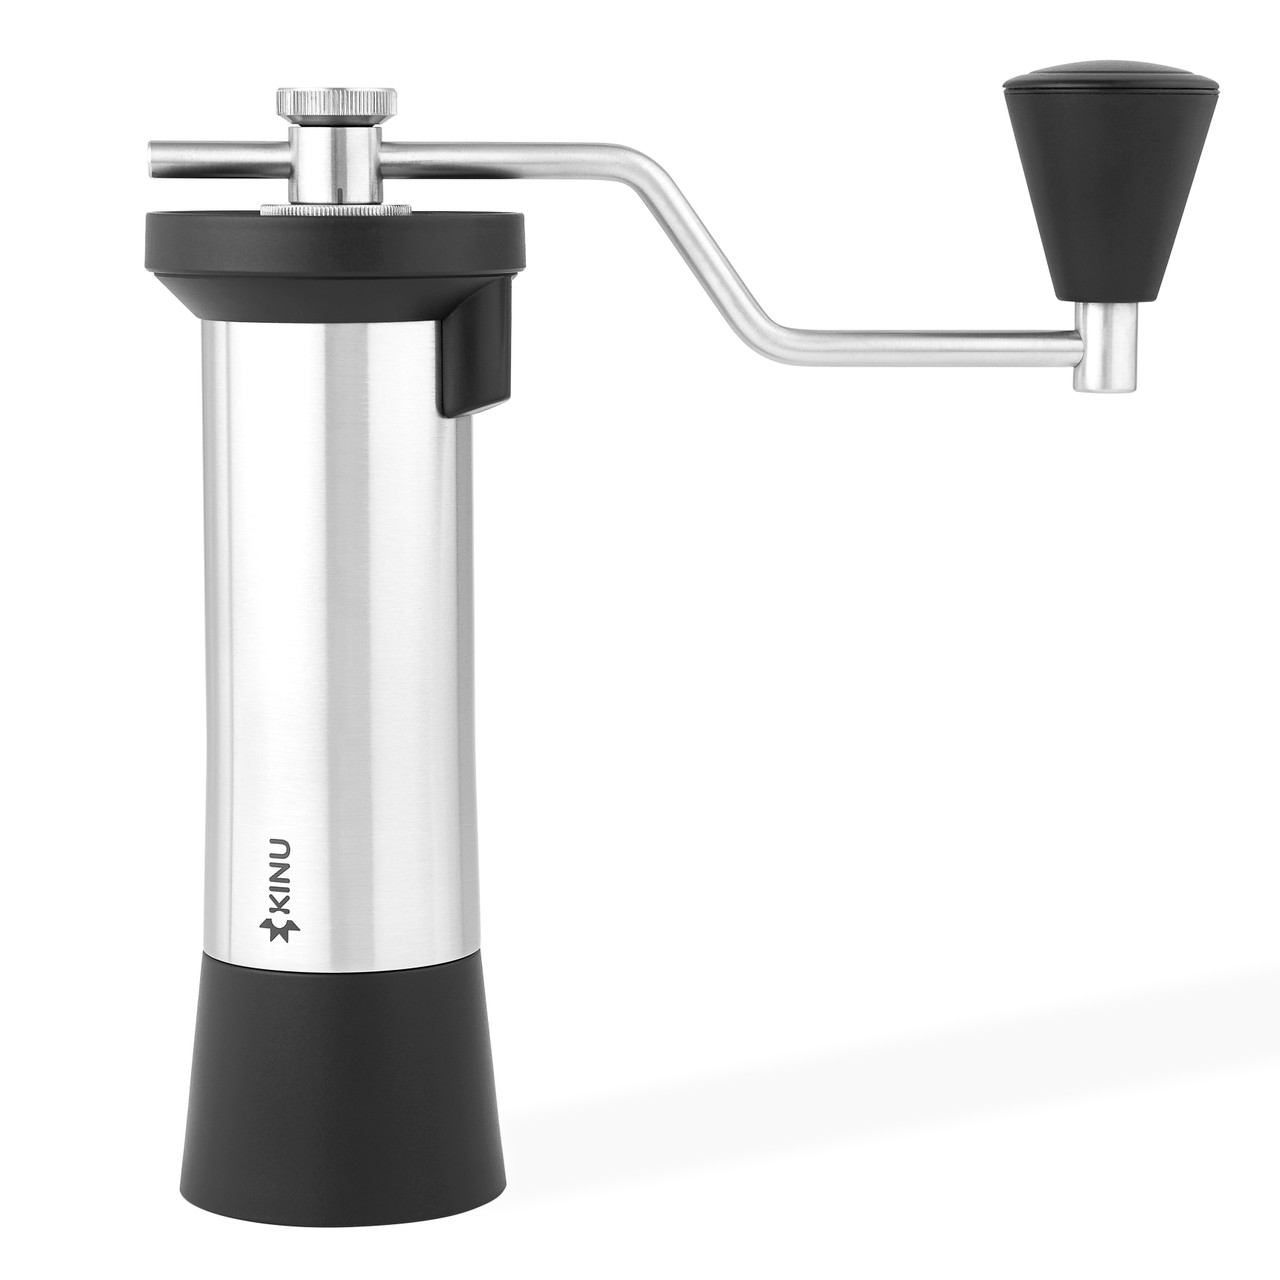 Electric Coffee Grinder MINI - Super Portable Design in Black with 200W of  Power, 50g Capacity - GrinderGo